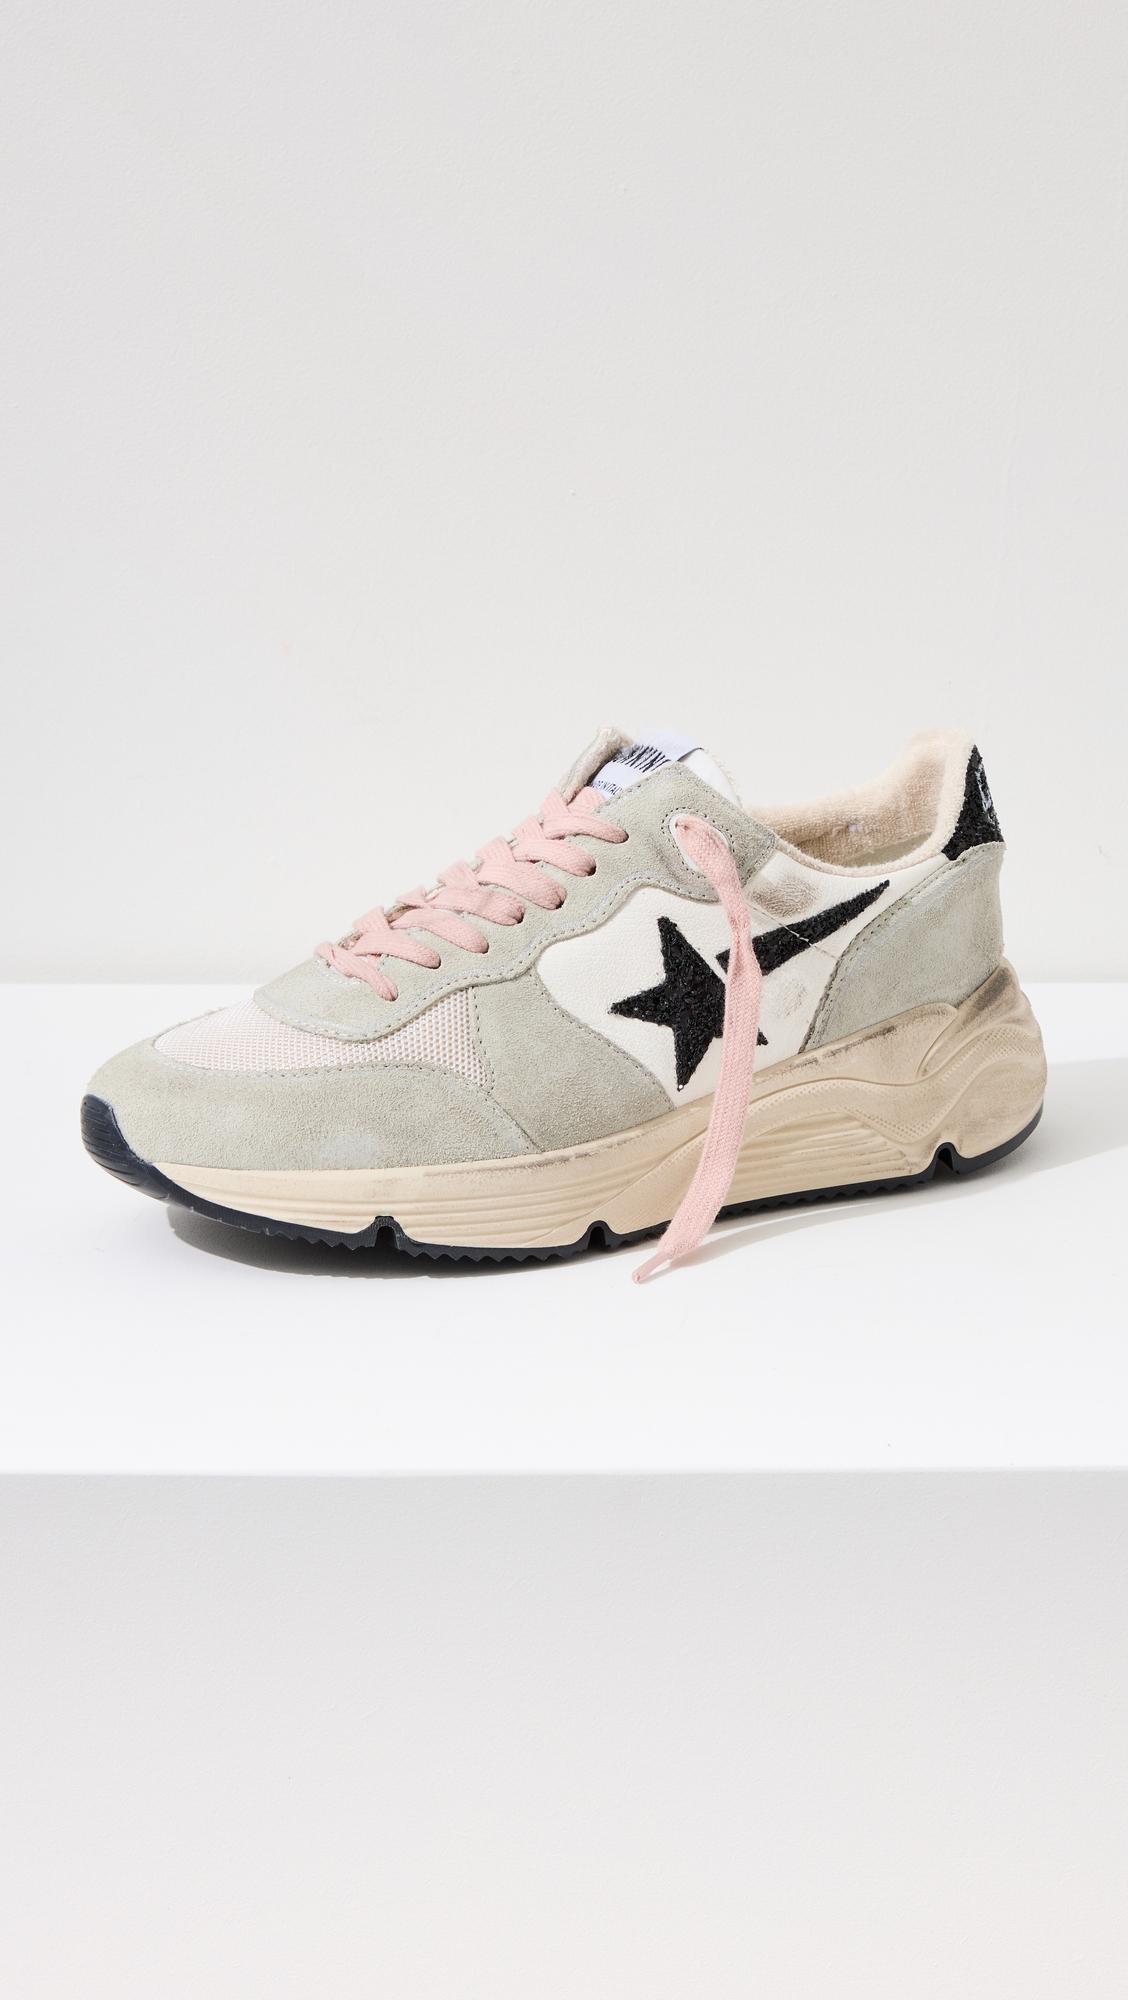 Golden Goose Running Sole Nappa Upper Suede Toe Sneakers in White | Lyst